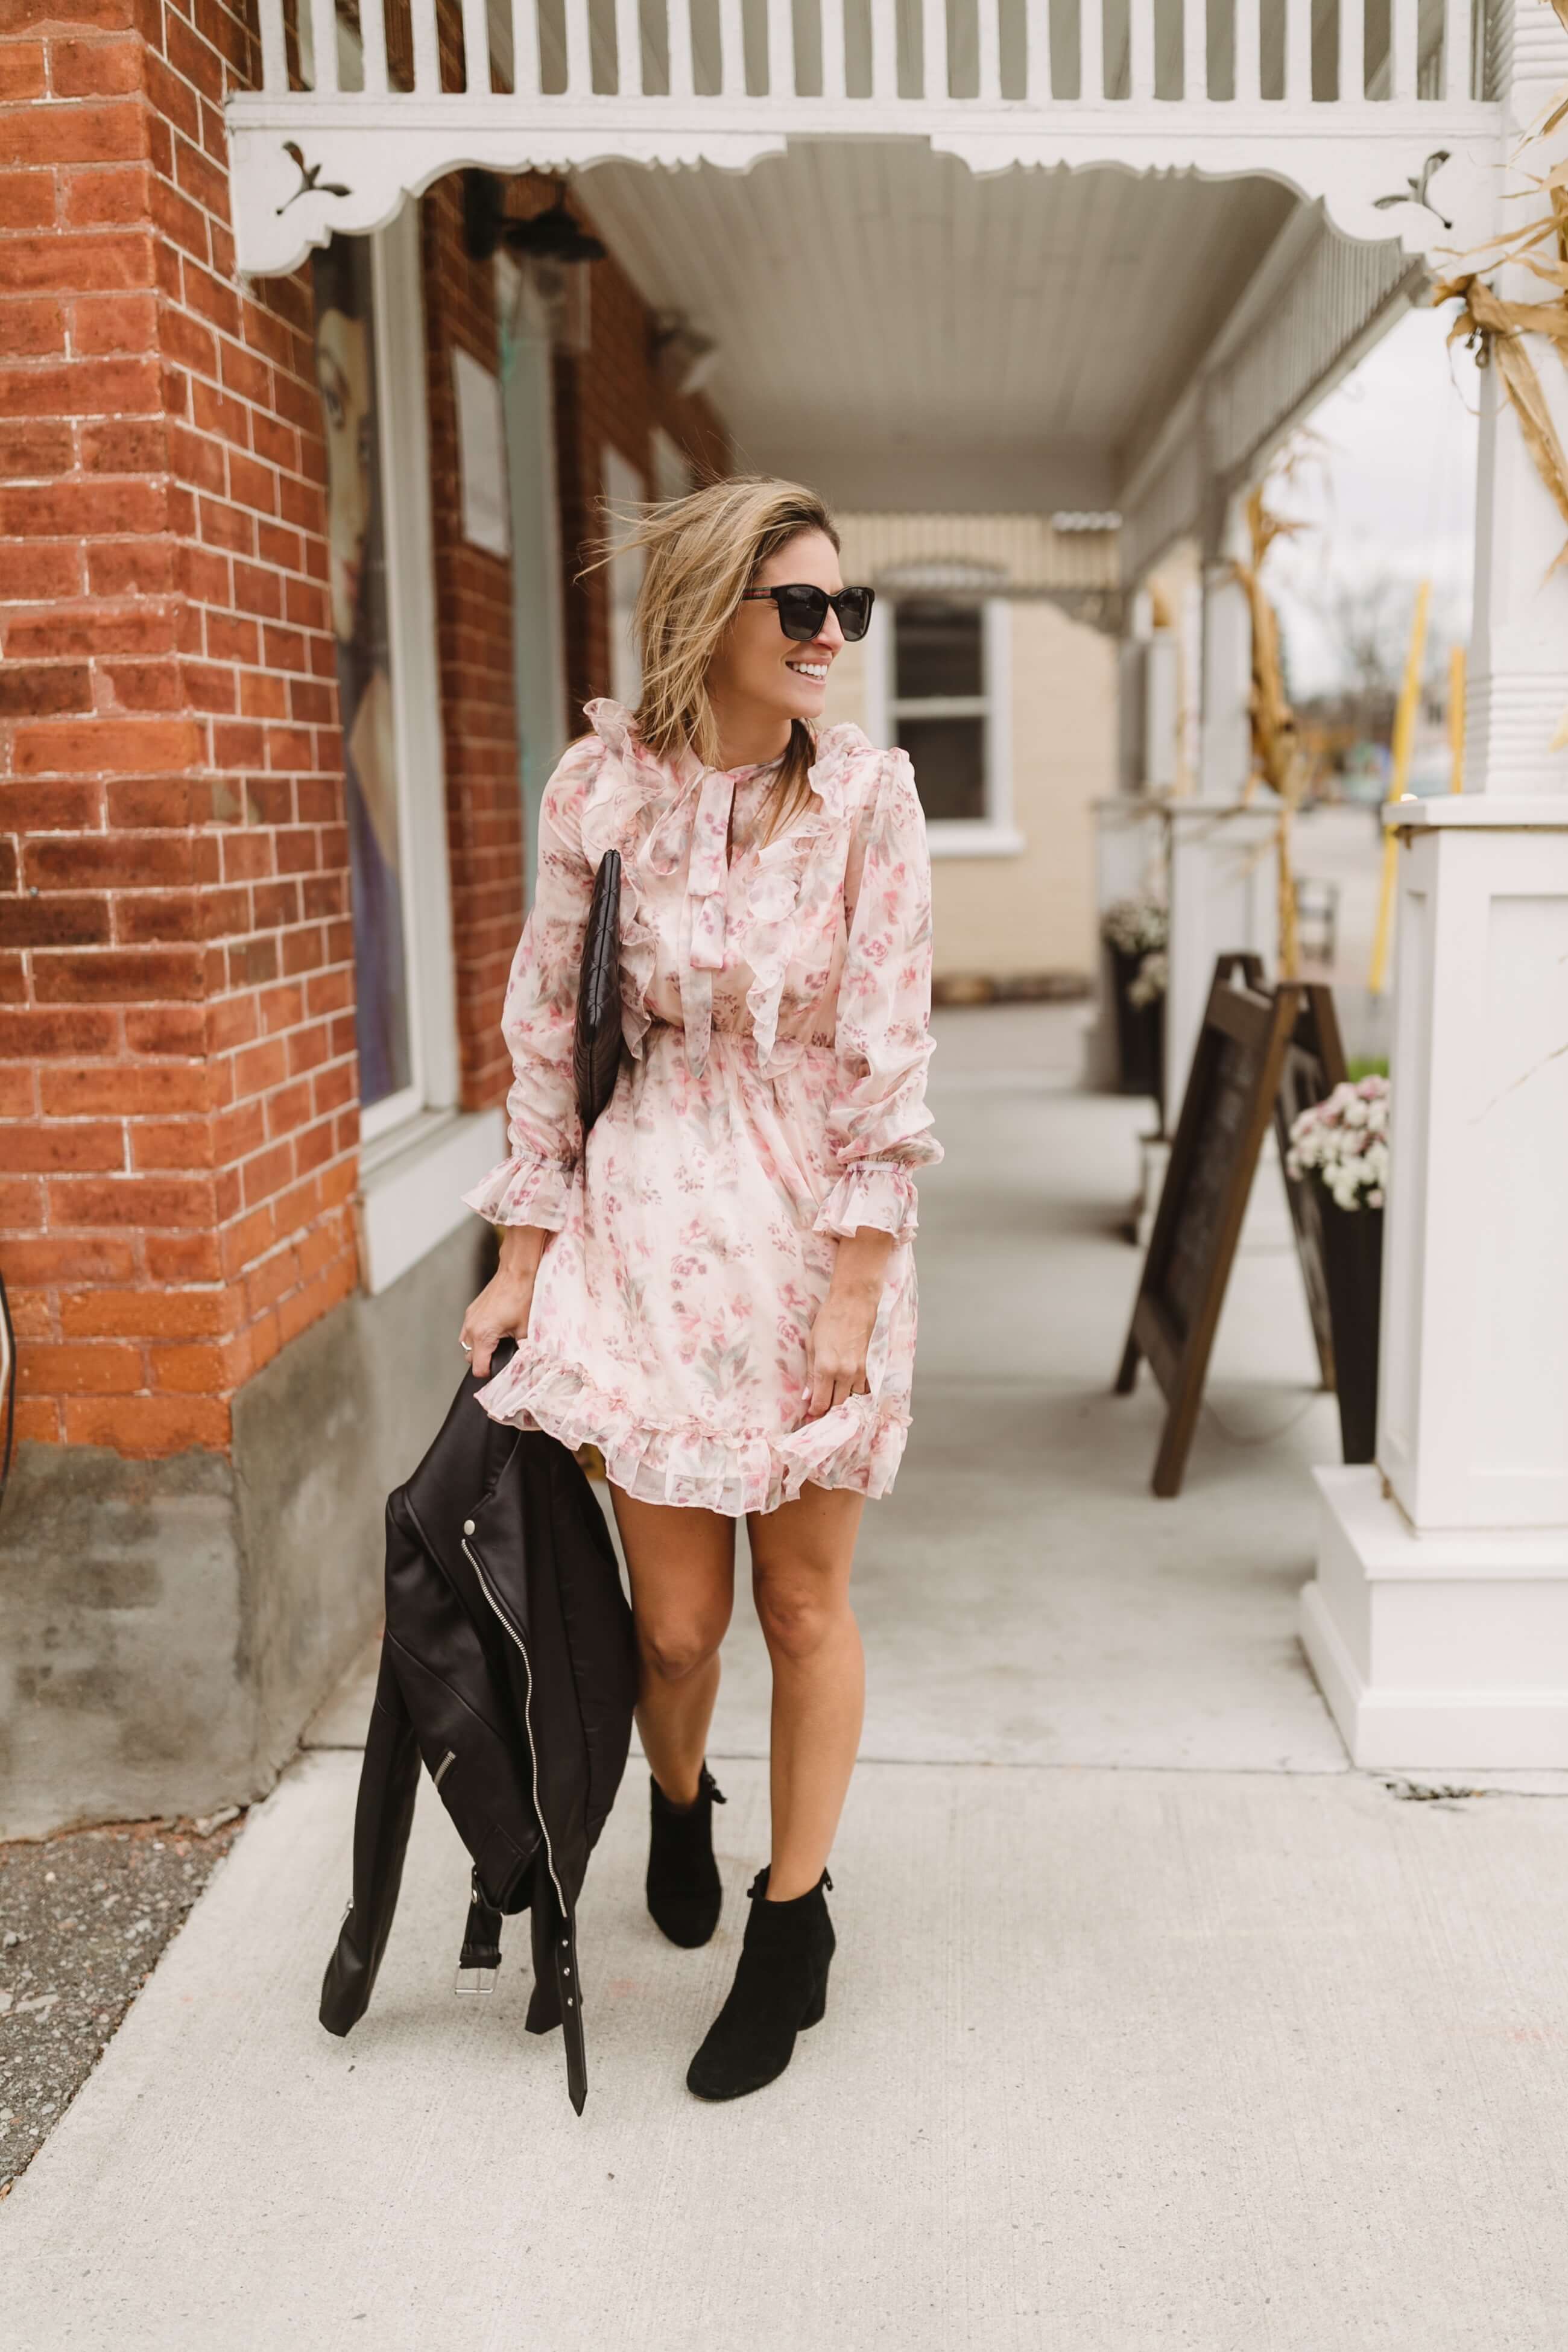 Winter floral dress with leather jacket; Mandy FURNIS sparkleshinylove